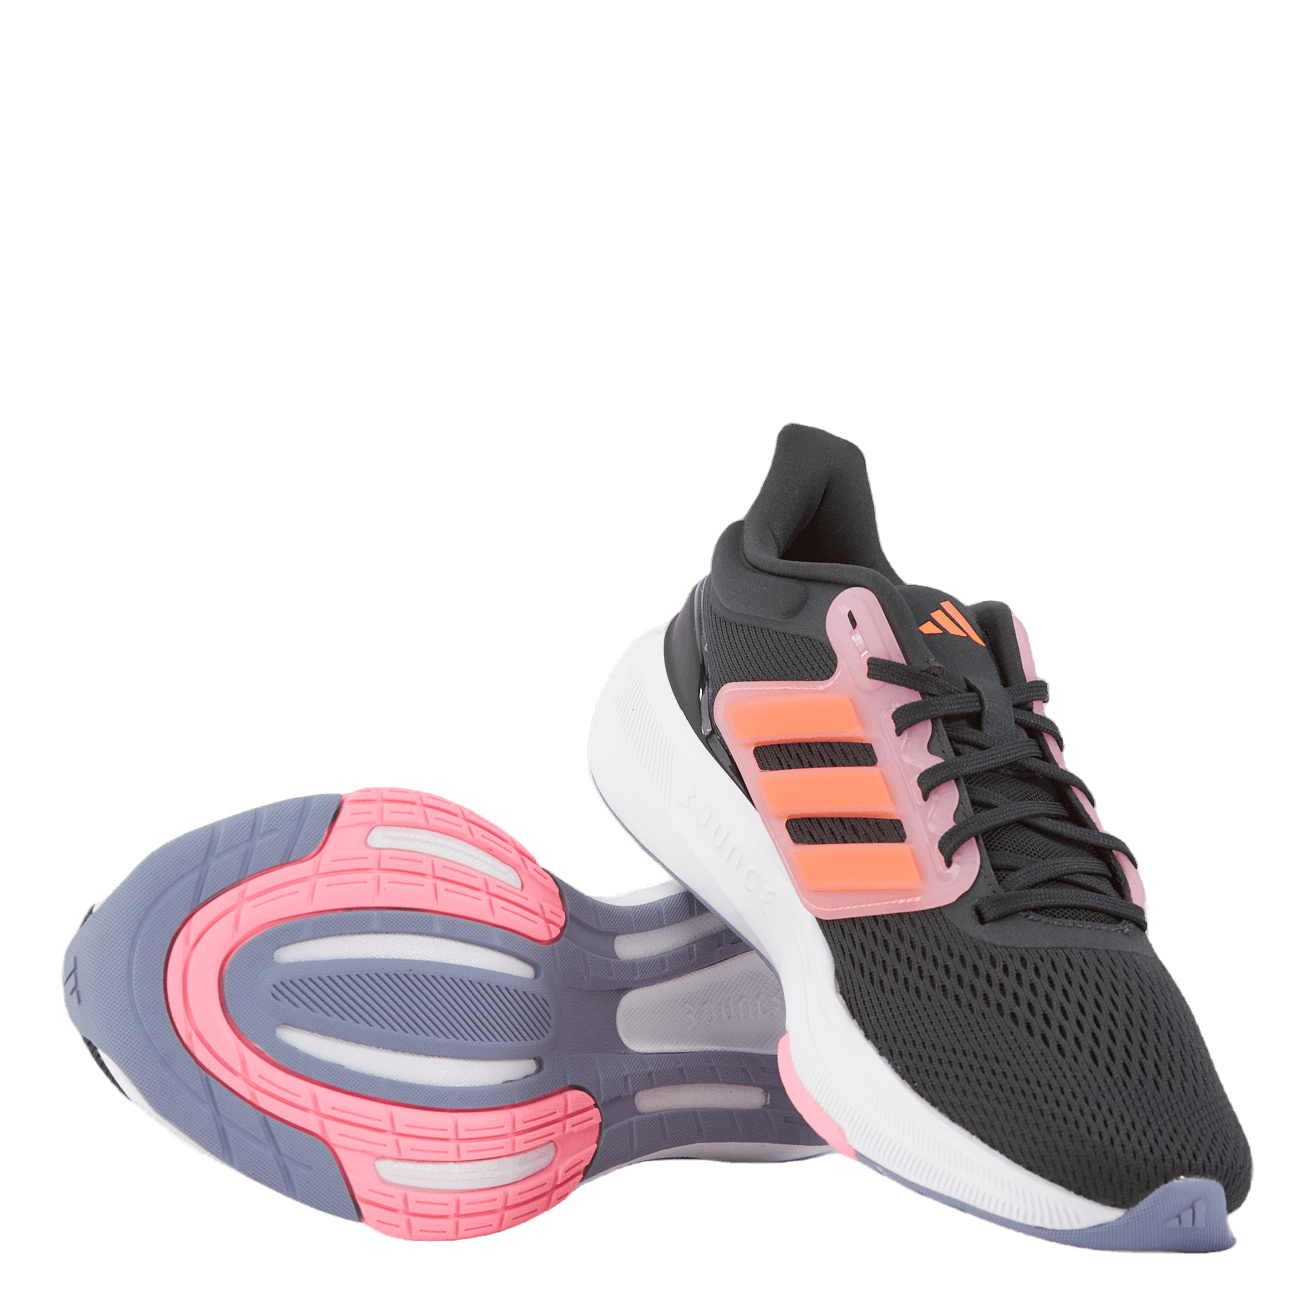 Ultrabounce Shoes Carbon / Screaming Orange / Beam Pink